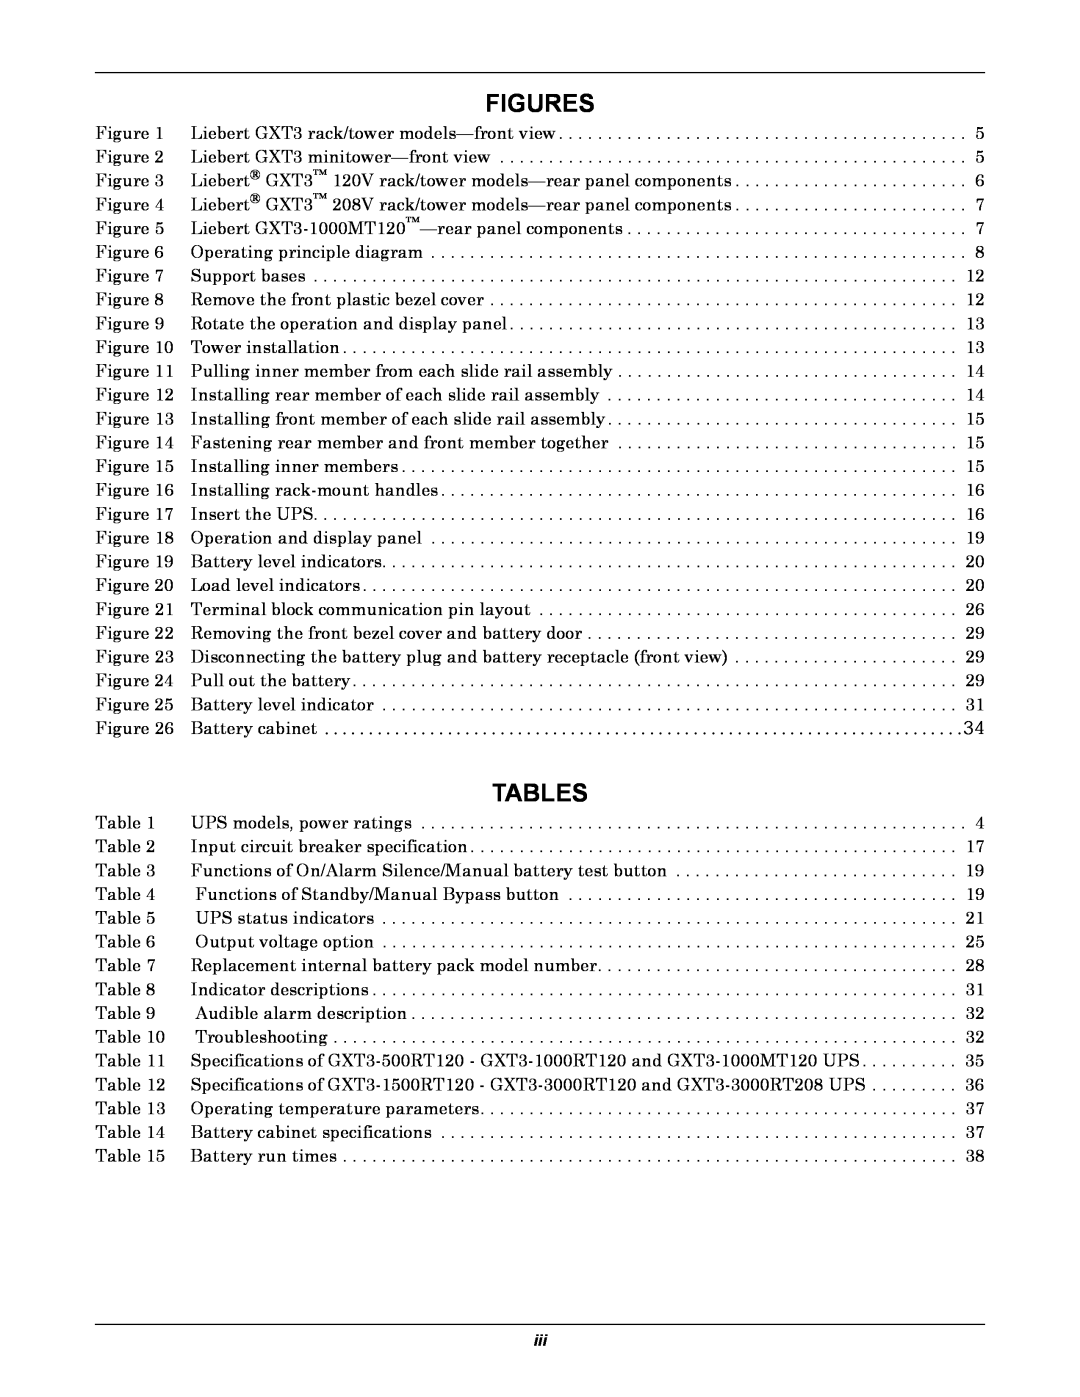 Emerson 208V, GXT3 user manual Figures, Tables 